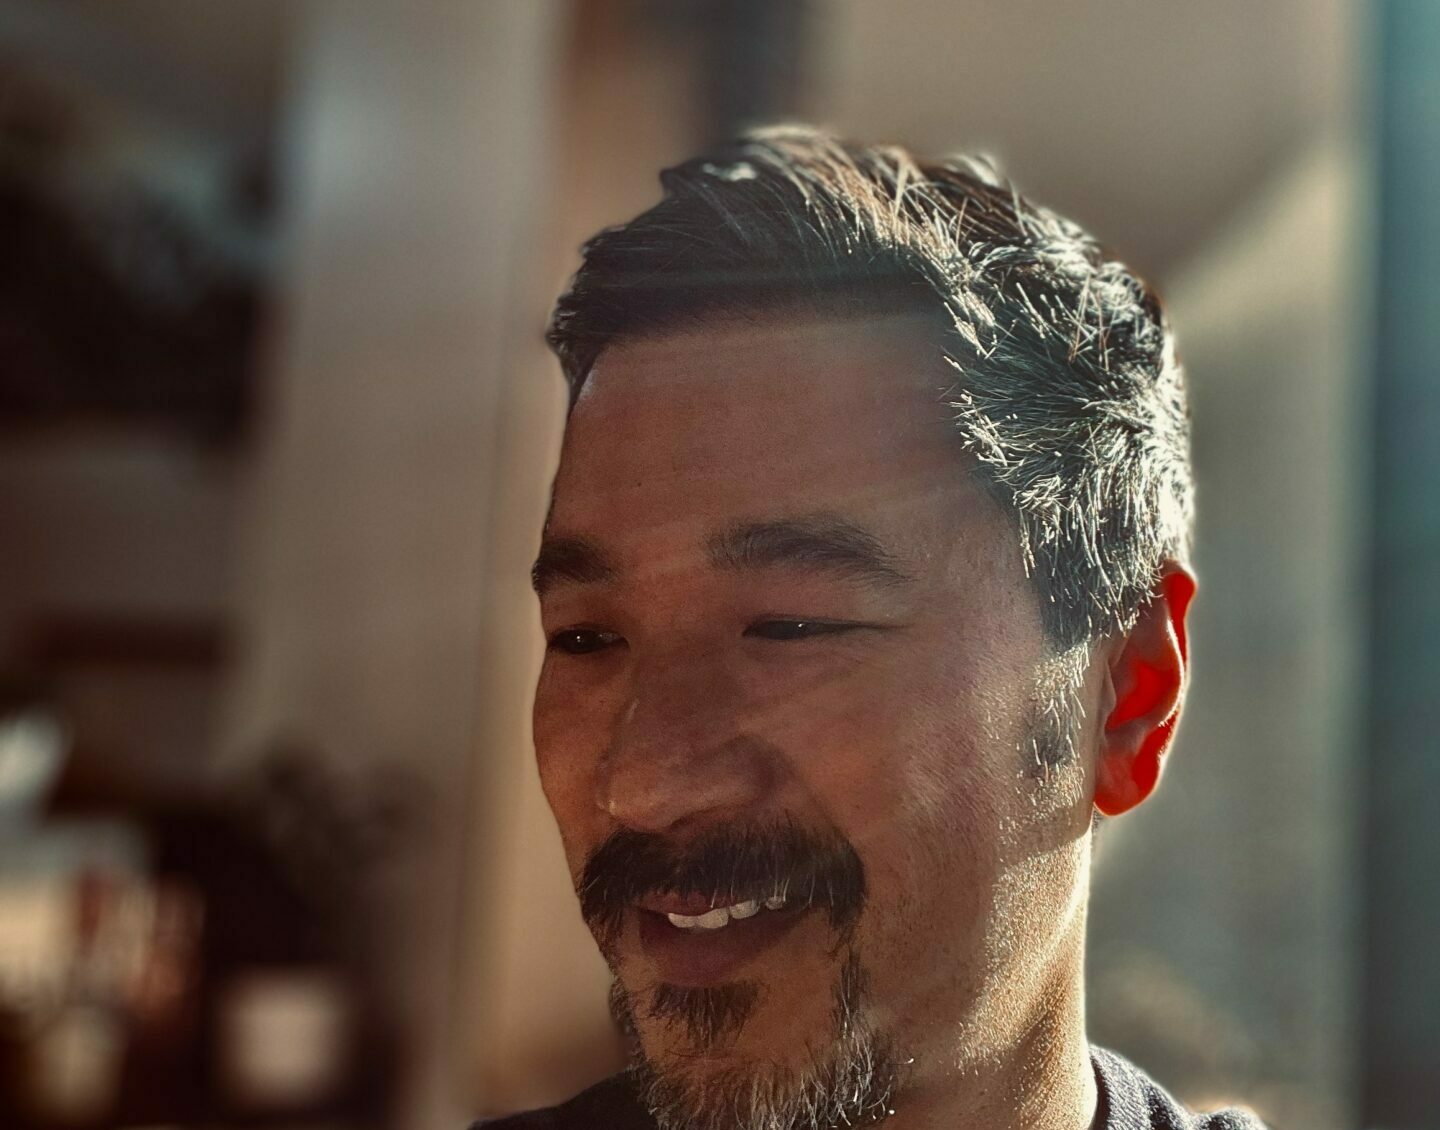 An Asian man with a goatee stands at an angle, smiling, as light shines across his face